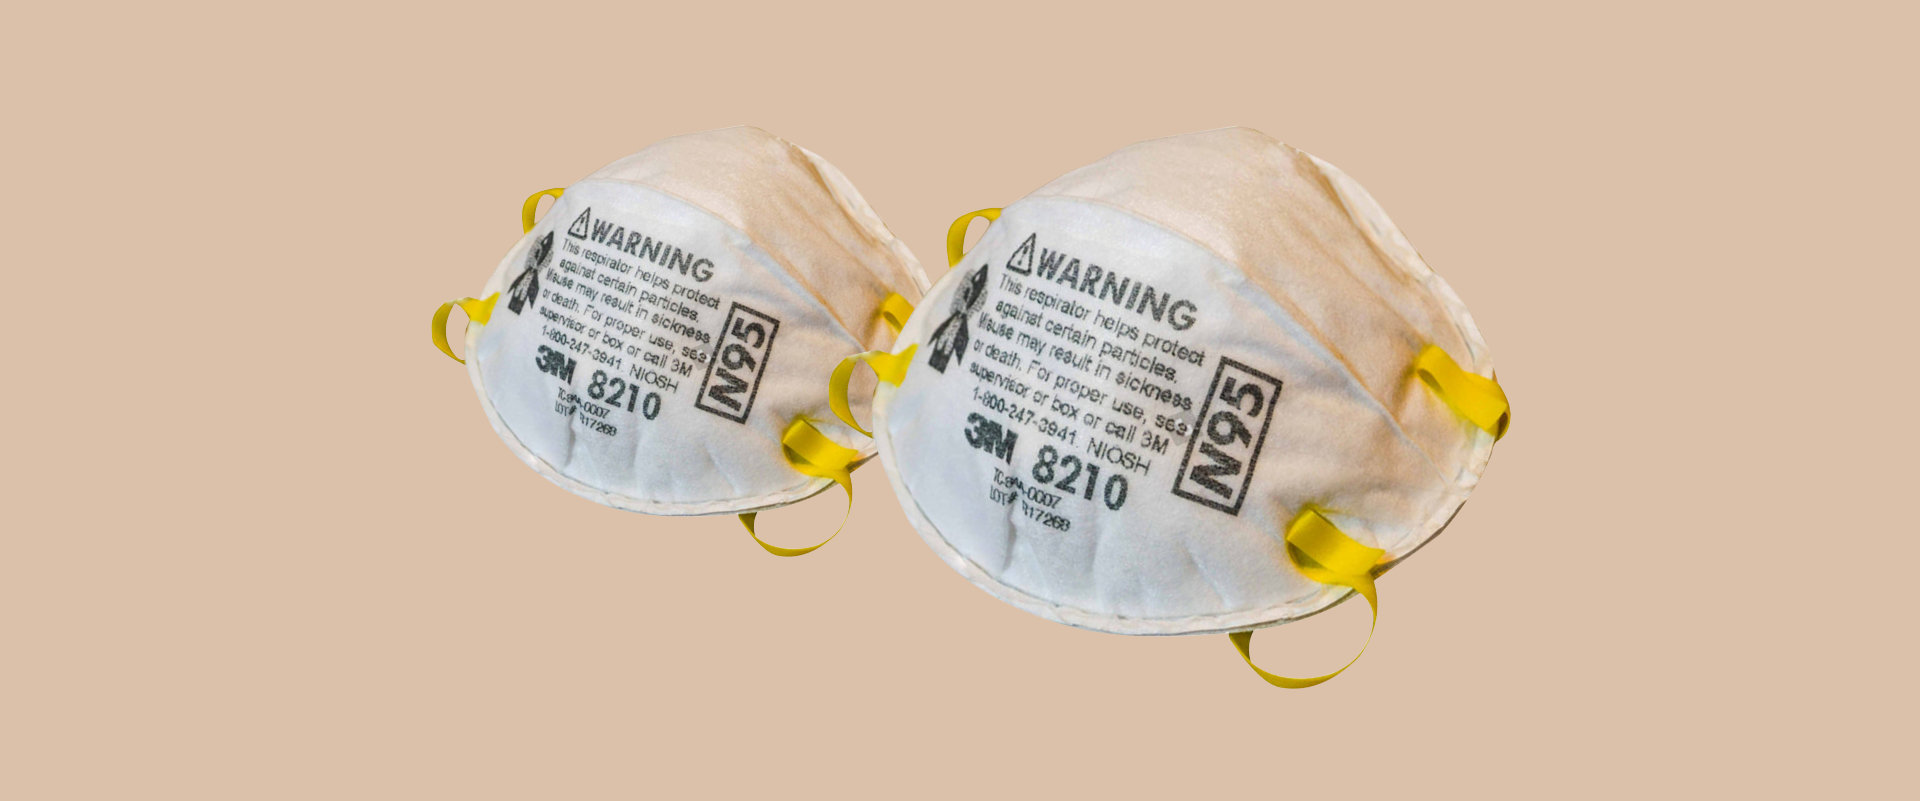 image of two n95 masks